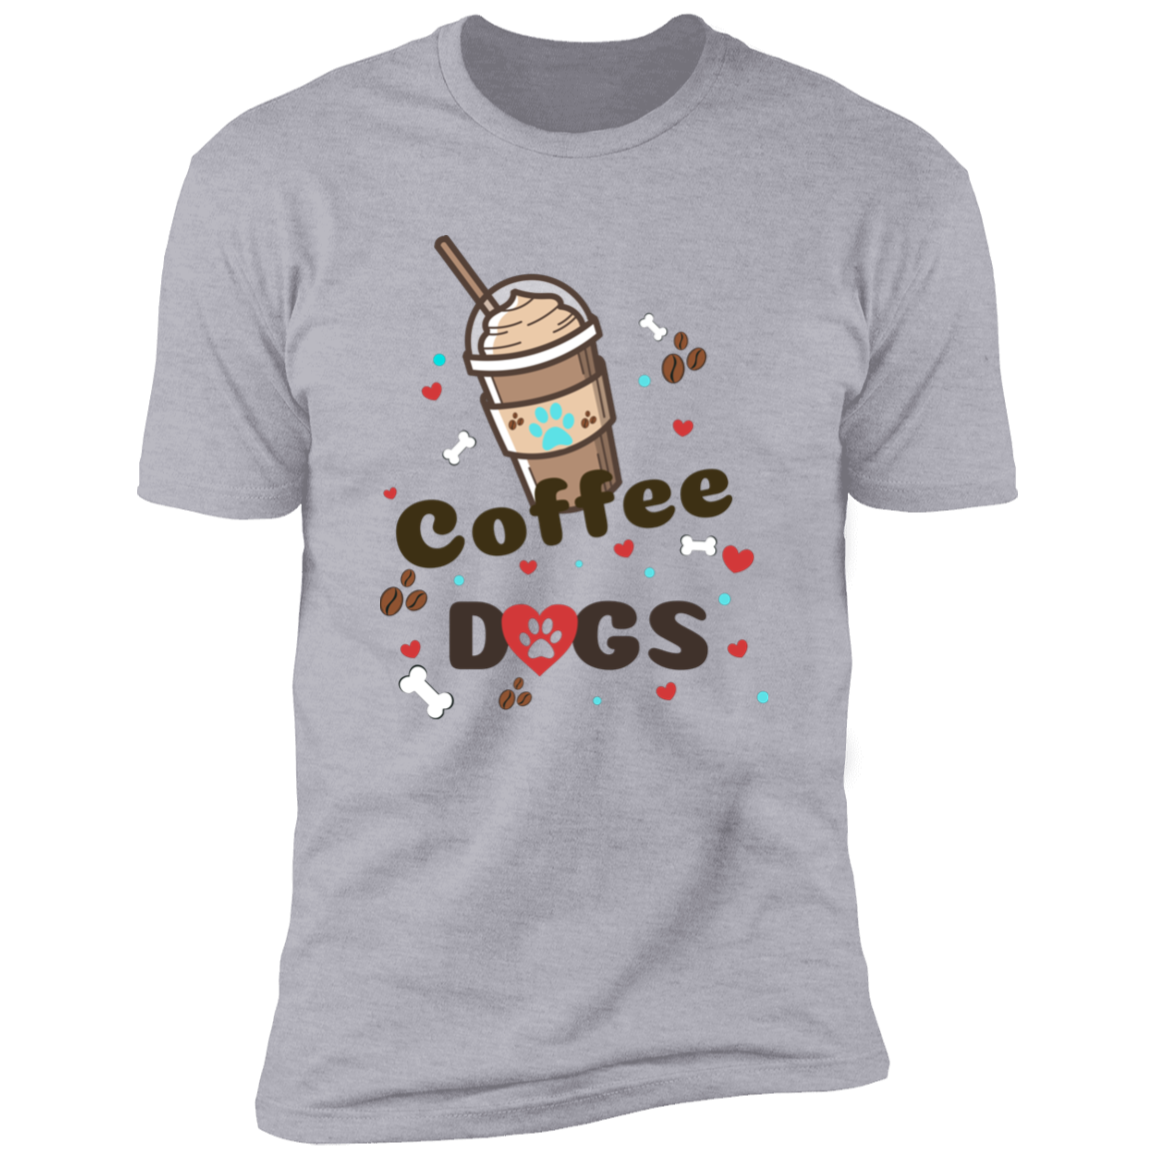 Blended Coffee Dogs T-shirt, Dog Shirt for humans, in light heather gray